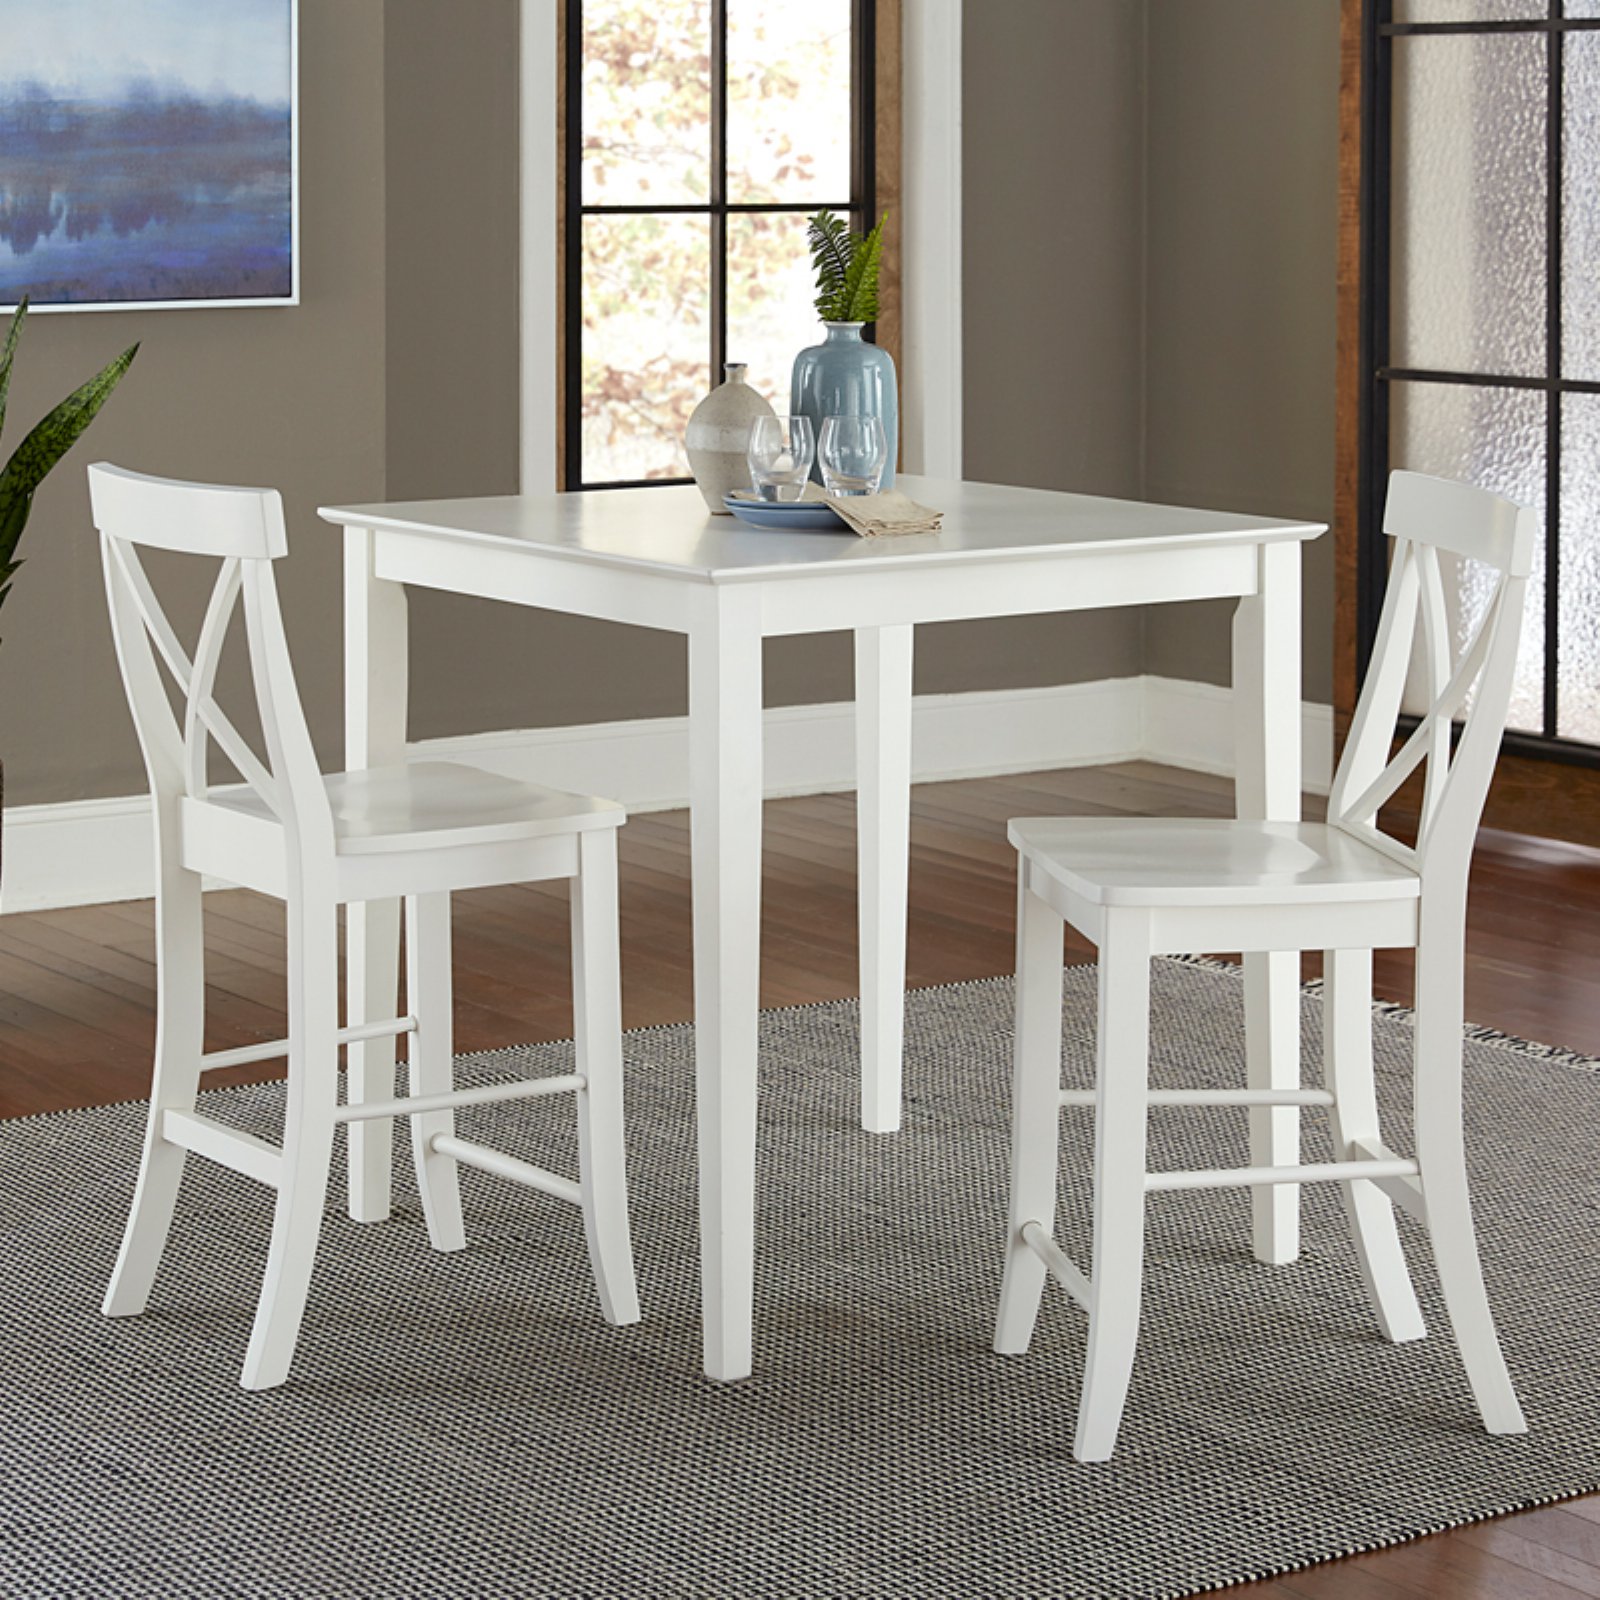 36" Square Counter Height Dining Table with 2 X-Back Stools - White - 3-Piece Set - image 1 of 4